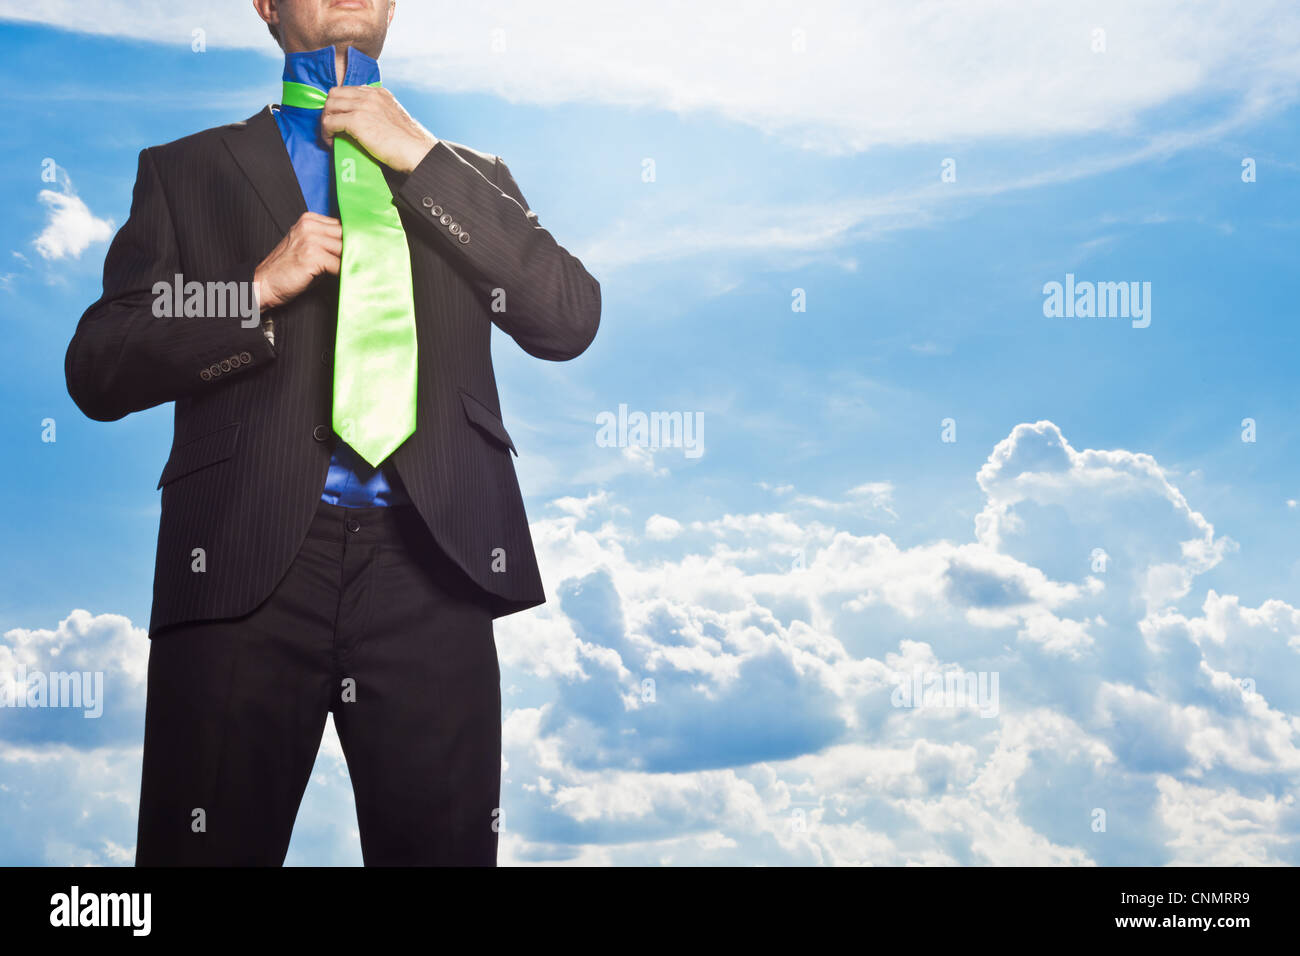 Businessman tying his tie outdoors Stock Photo